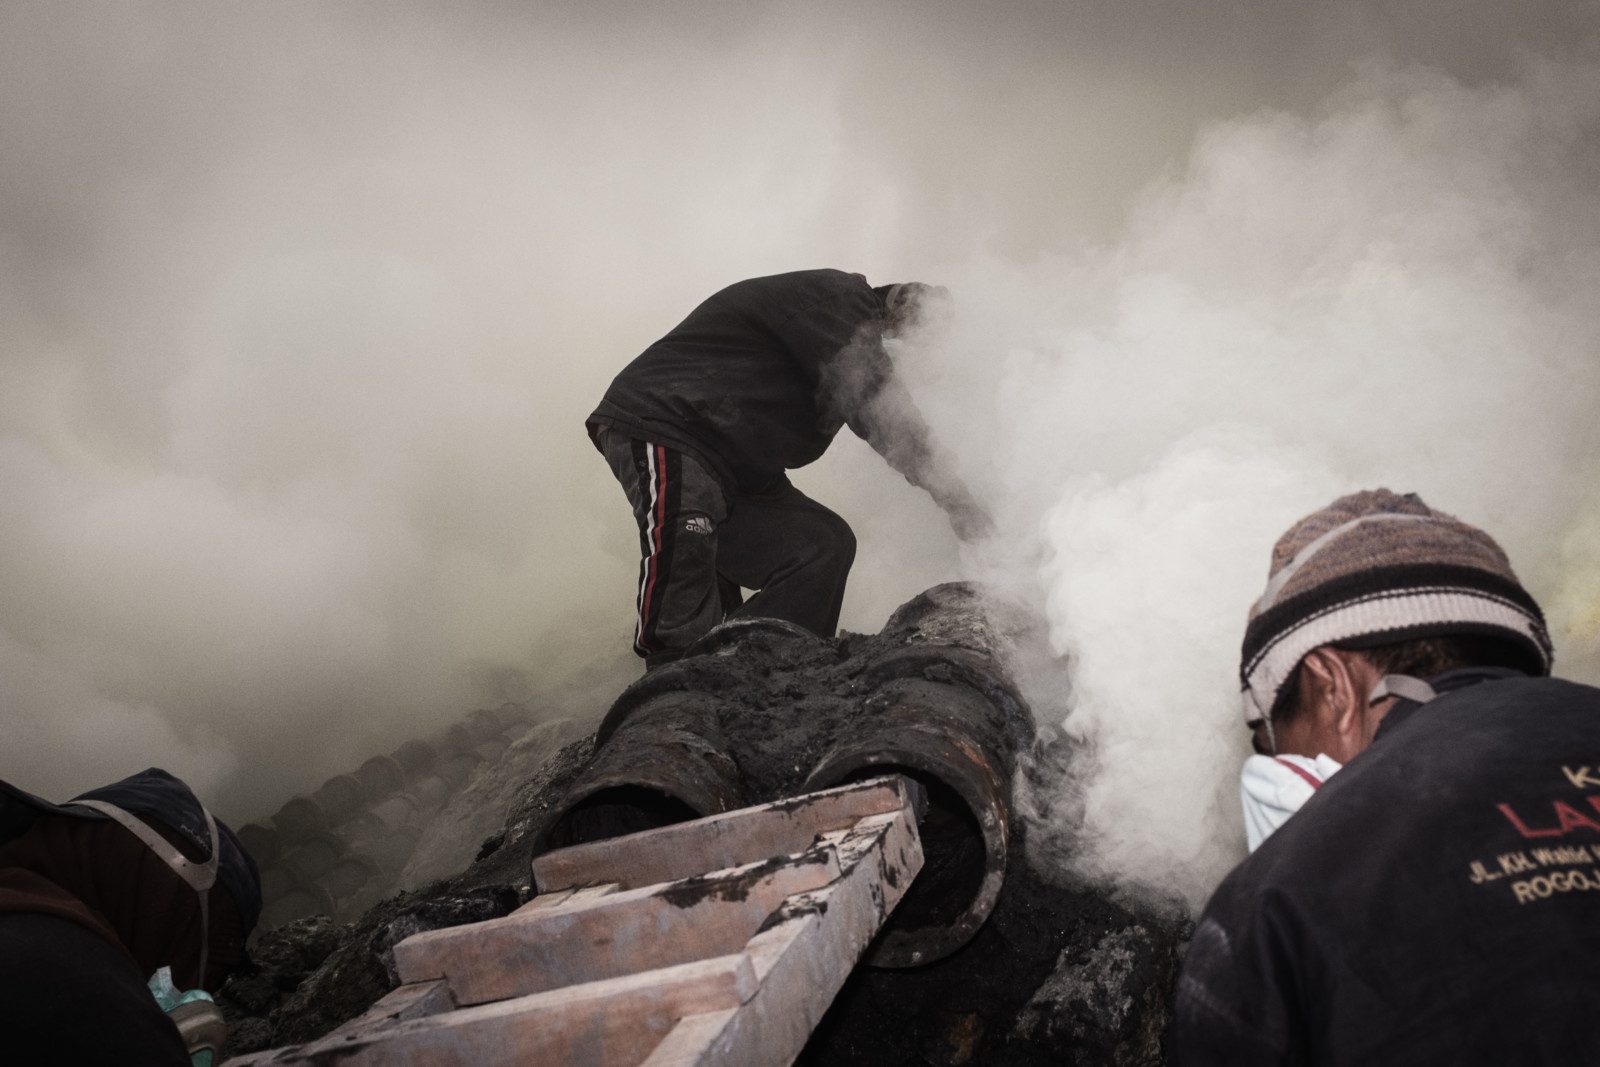 Sulfur Miners Photographed with a Fuji X100F